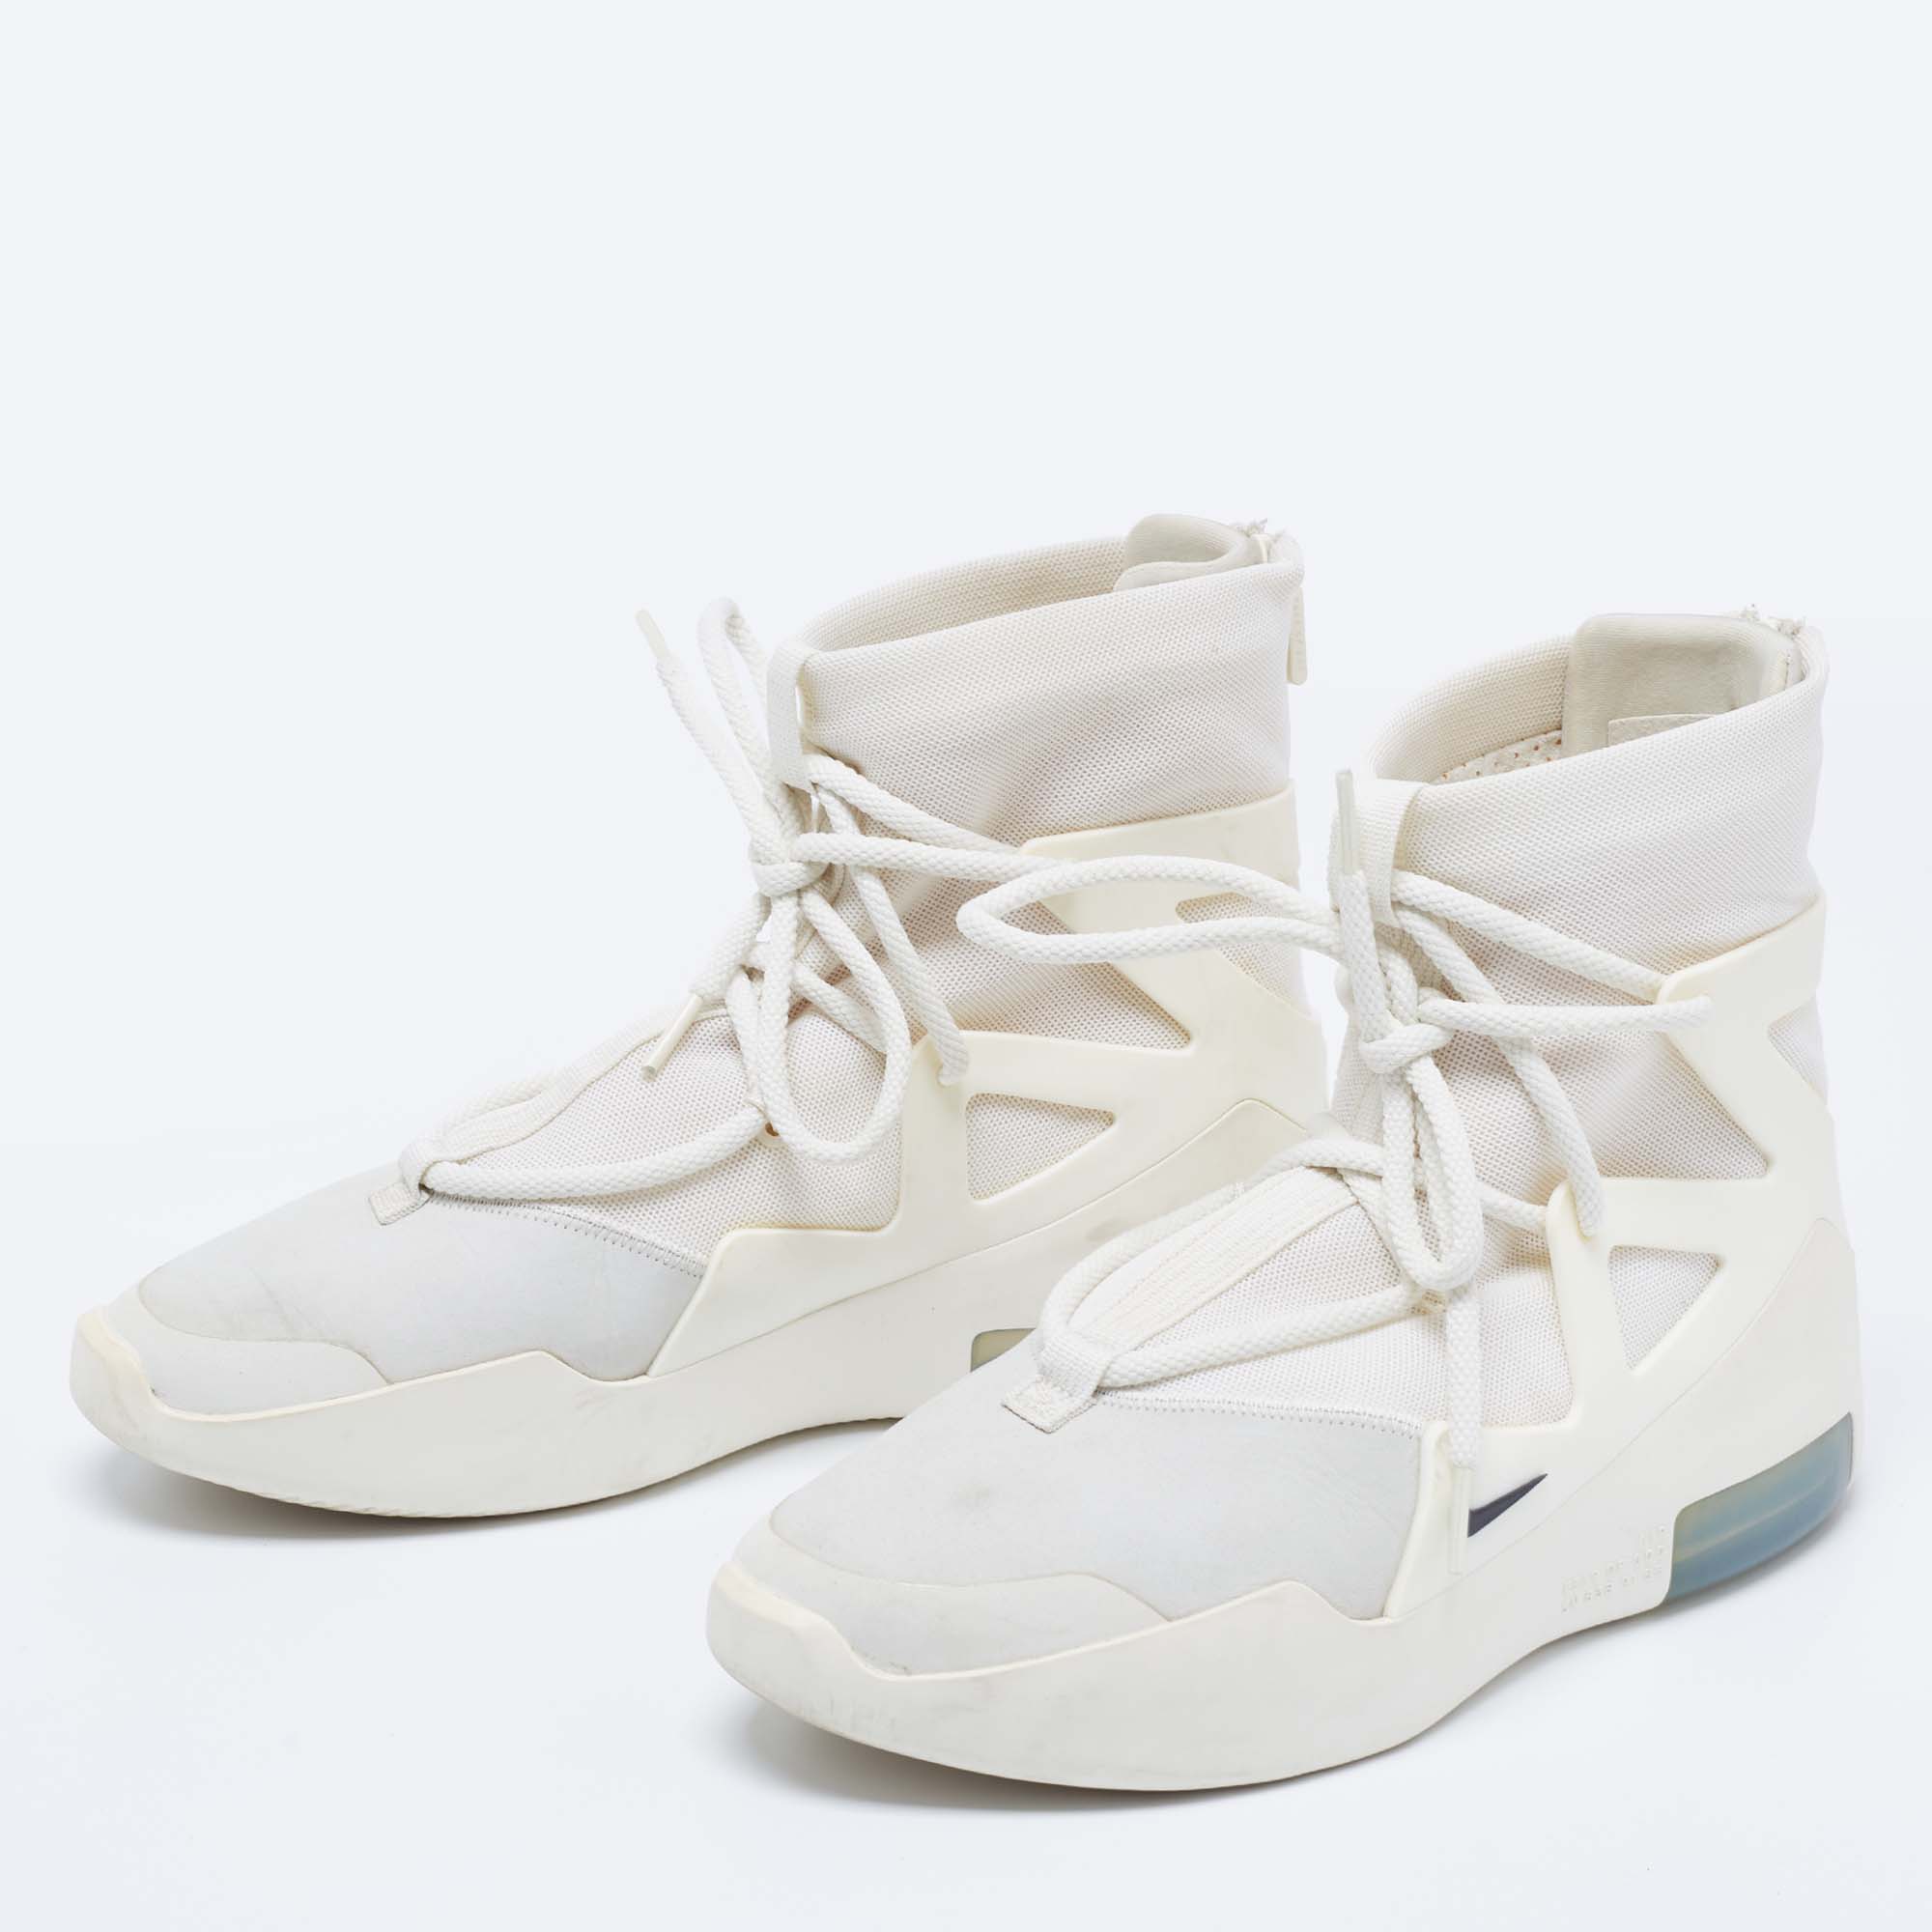 

Nike Air X Fear Of God White/Grey Leather And Mesh Basketball High Top Sneakers Size